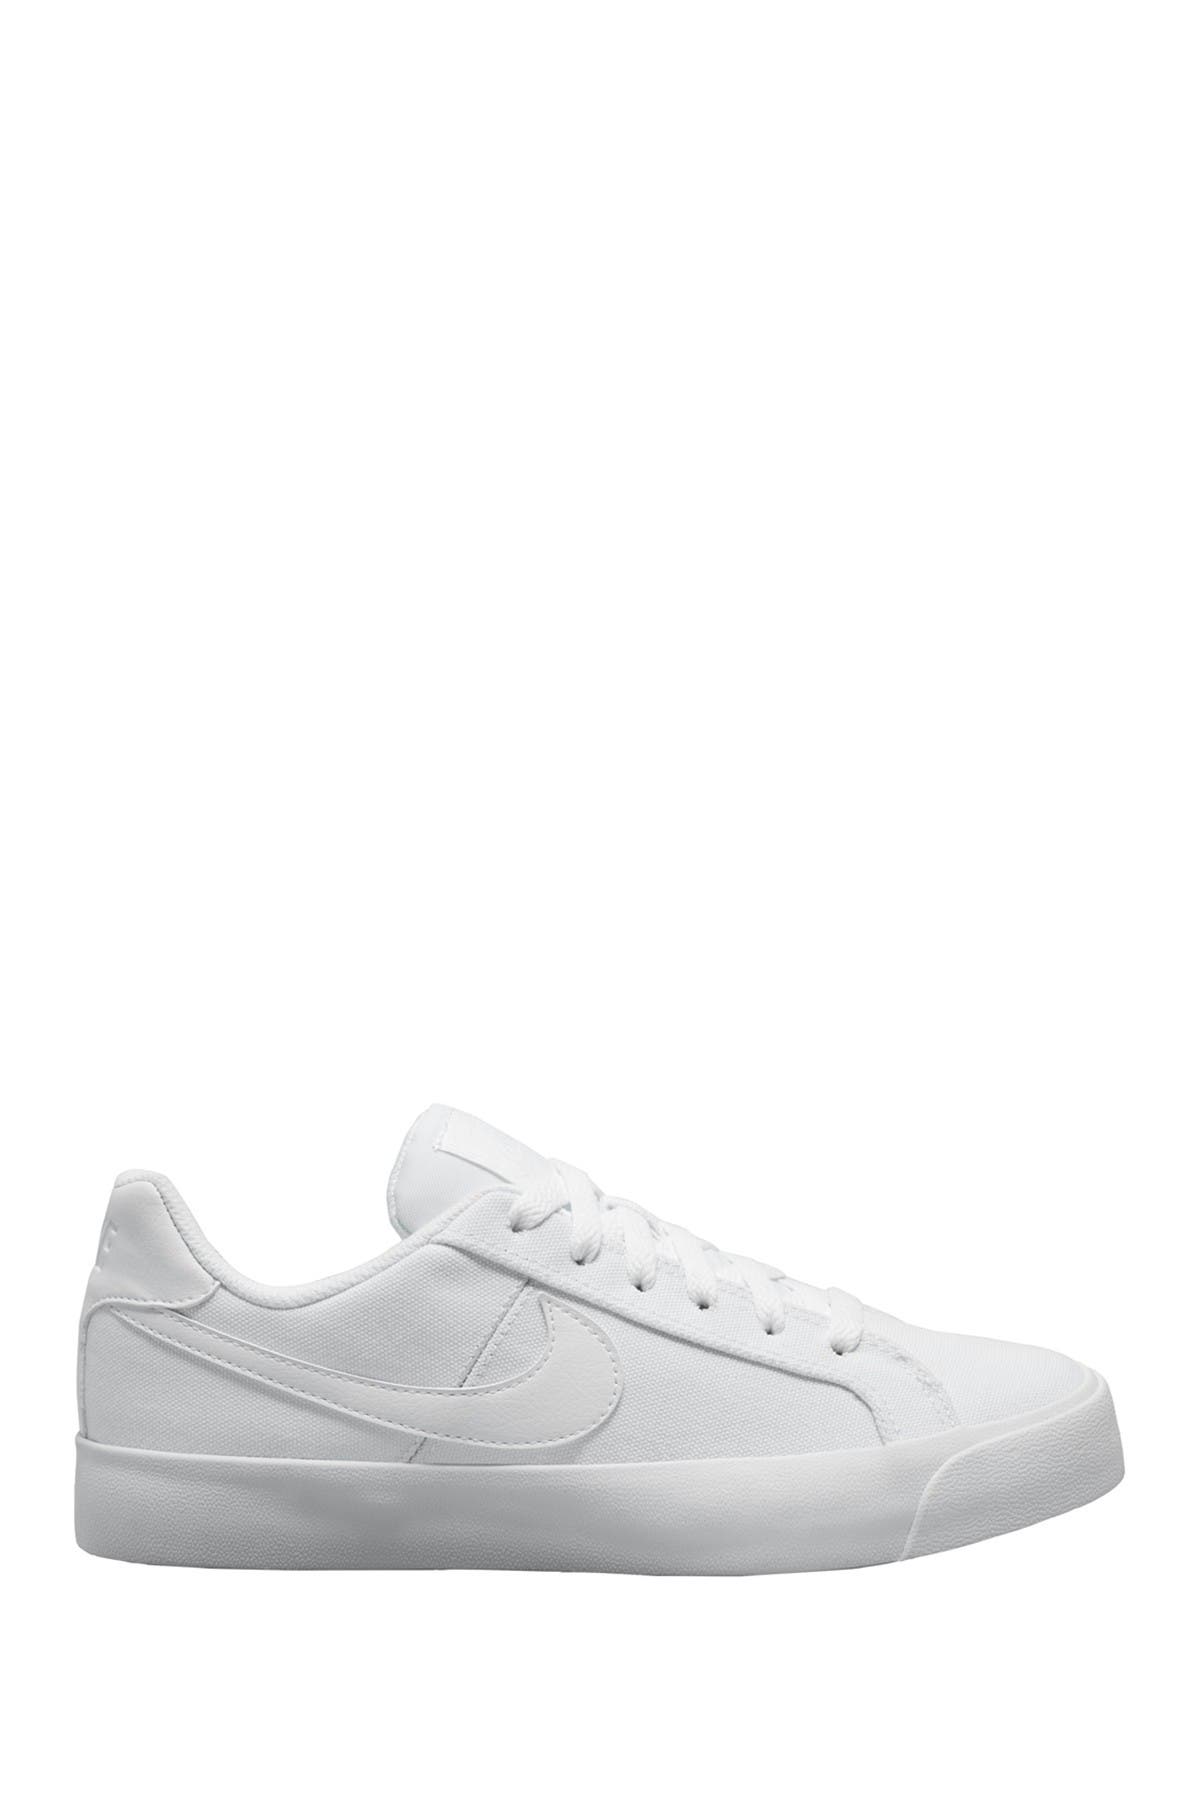 nike royale court sneakers